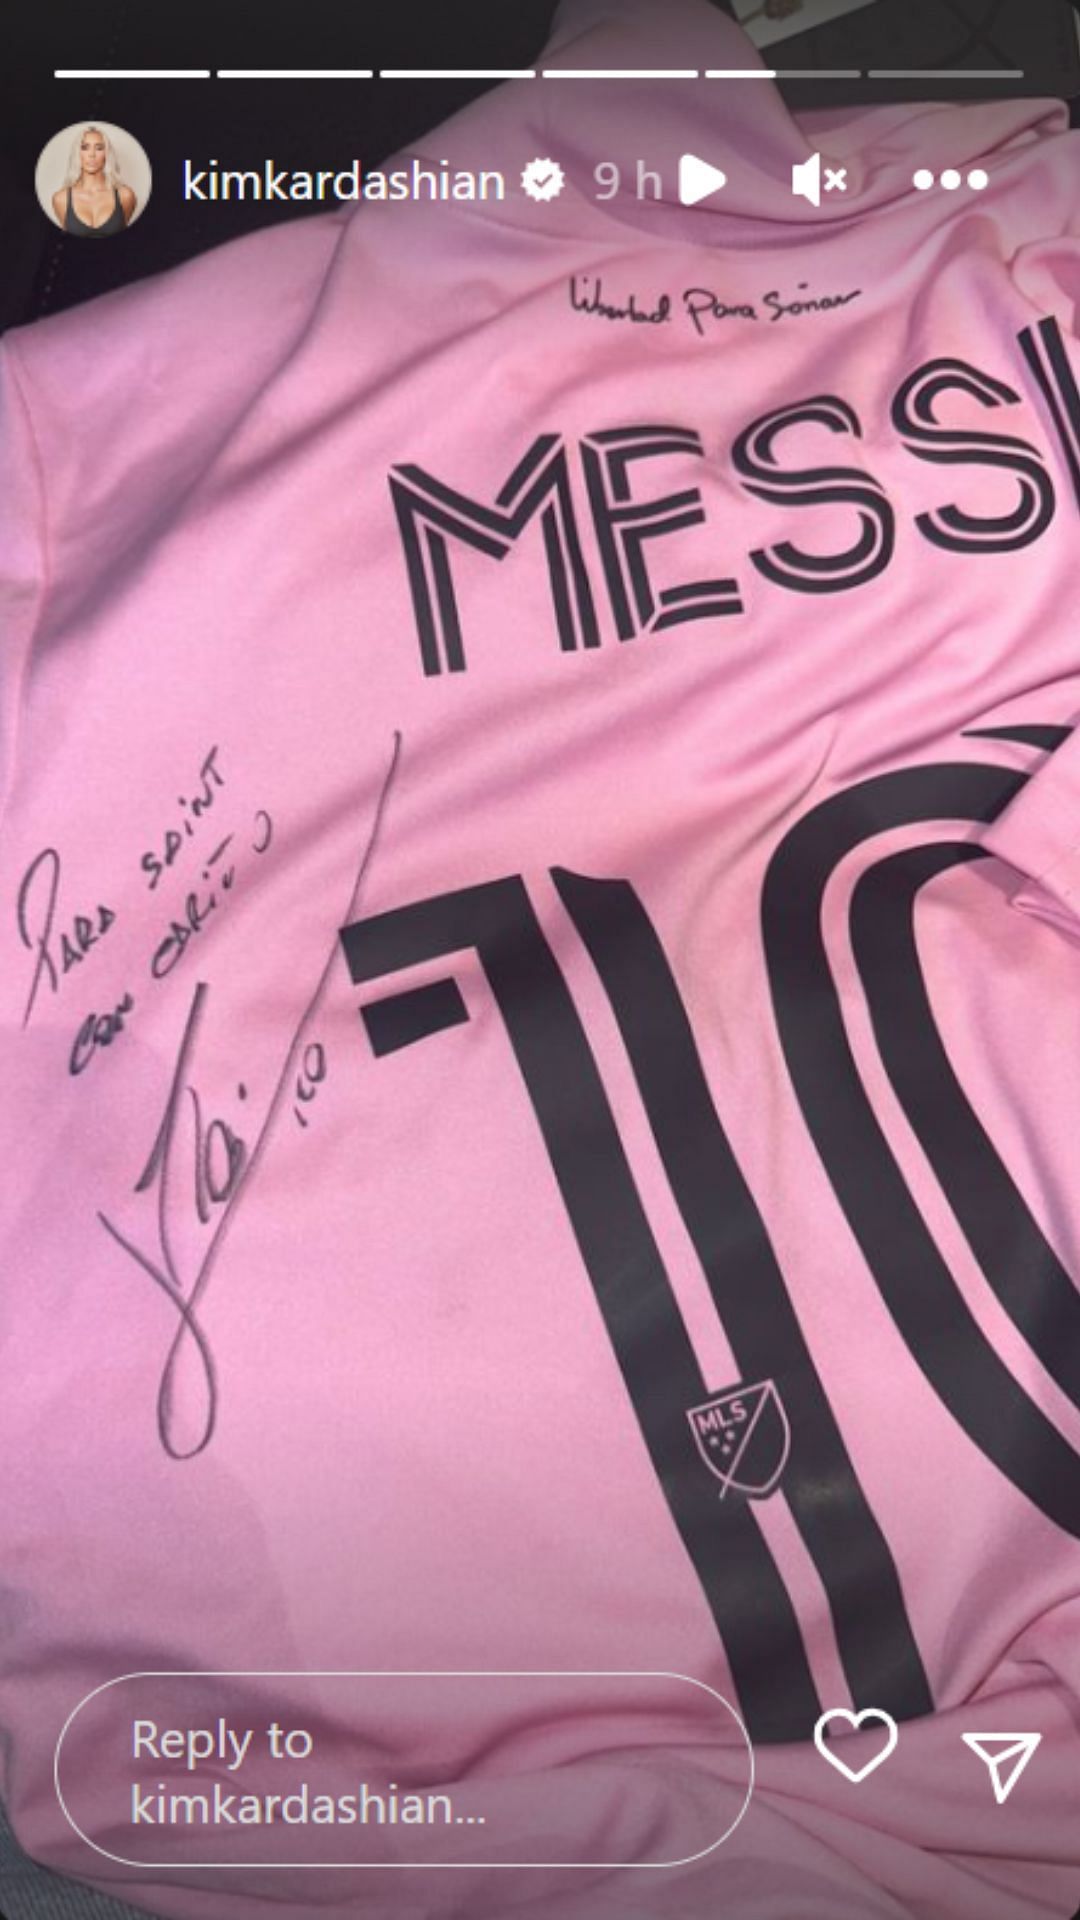 Messi sent a special gift to Kardashian and her kids.